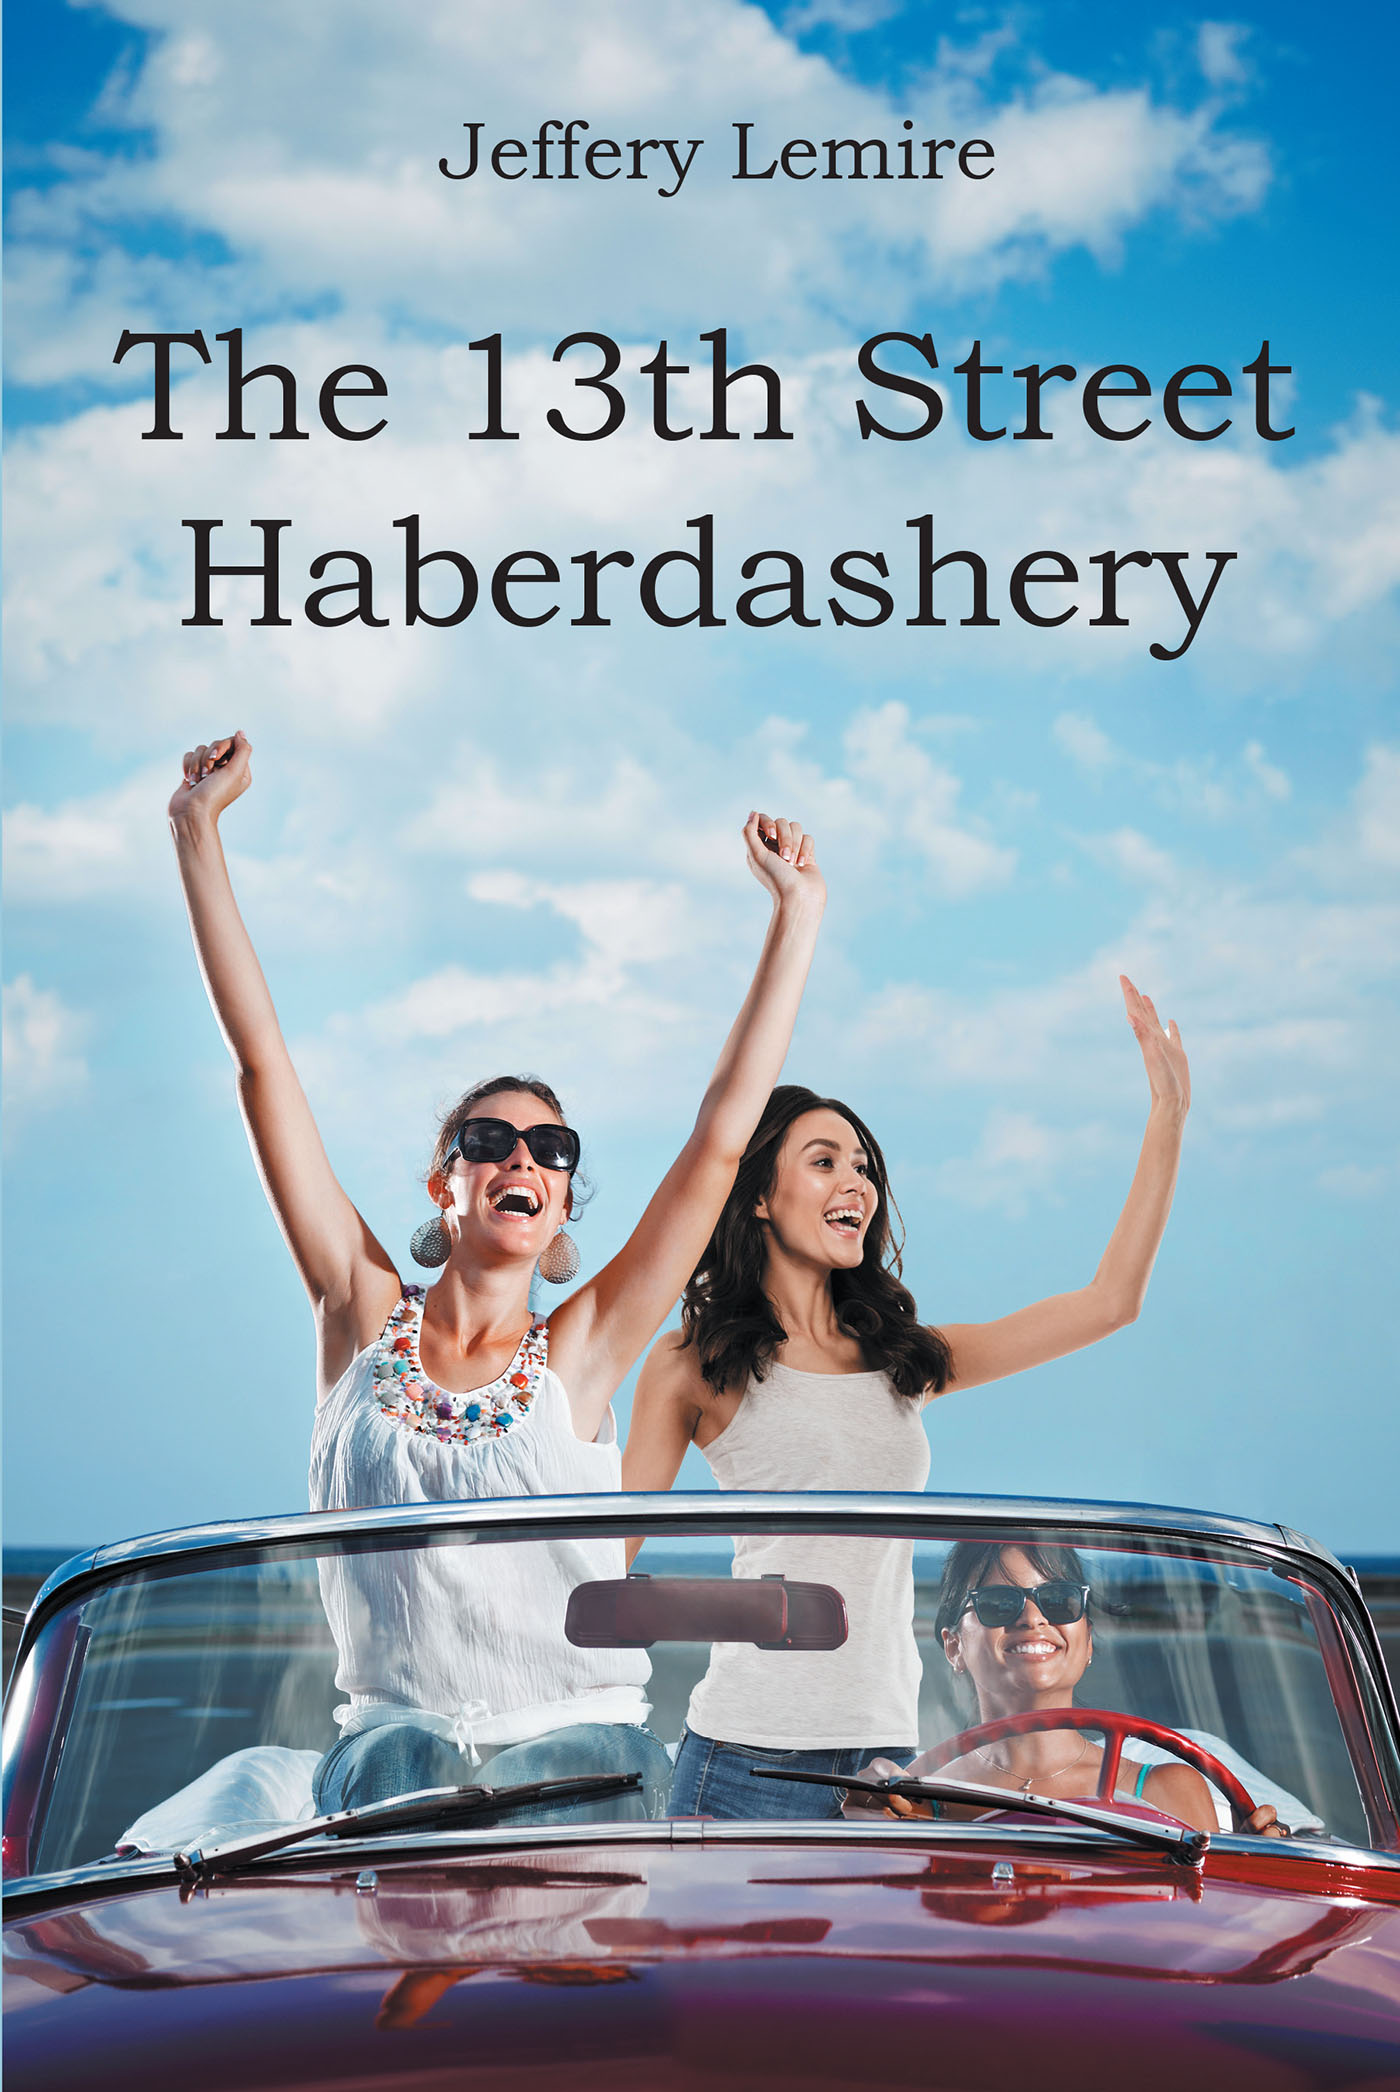 Author Jeffrey Lemire’s New Book, “The 13th Street Haberdashery,” is a Spellbinding Whodunit Following the Resurrection of a Fifty-Year Cold Case in a Small Town